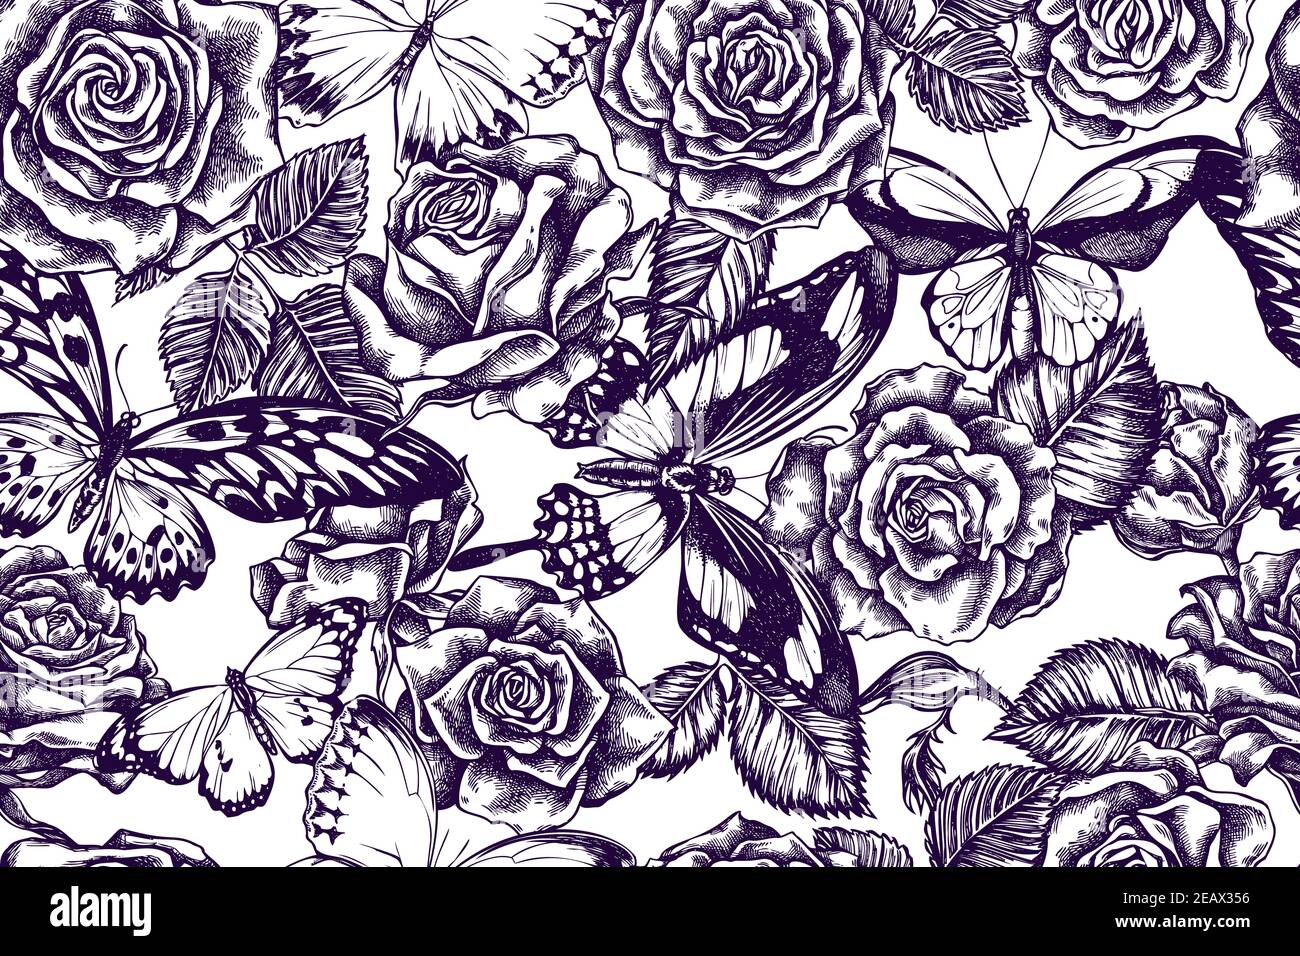 Artistic seamless pattern with african giant swallowtail, wallace's golden birdwing, jungle queens, plain tiger, papilio torquatus, roses Stock Vector